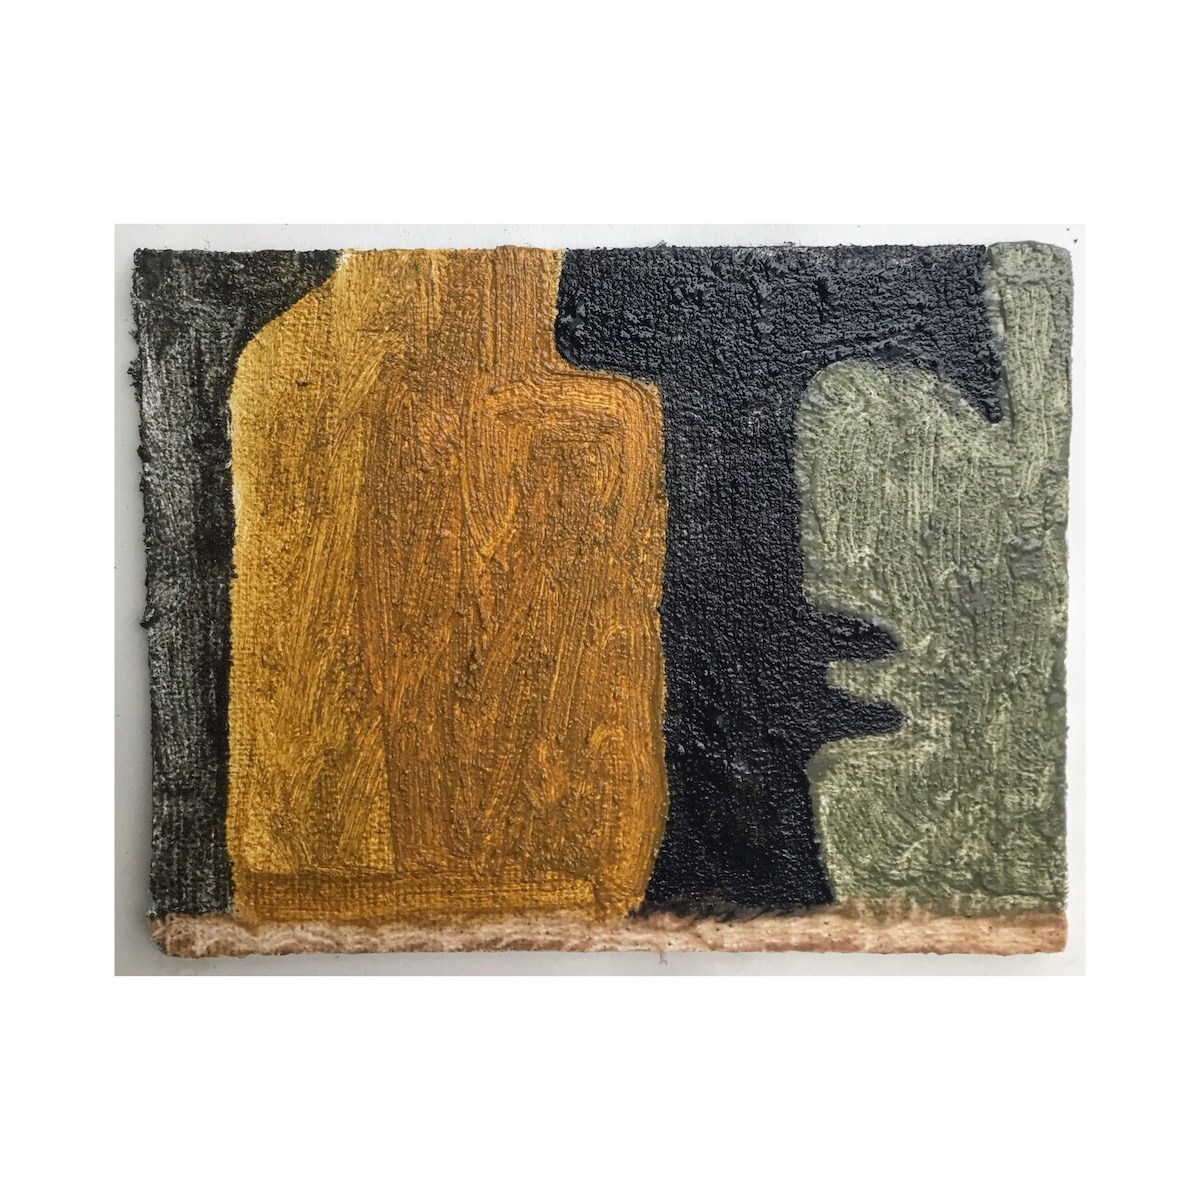 051 gold and green bodies (Cornish earth pigments and linseed oil on primed salvaged card; 25x17cm)